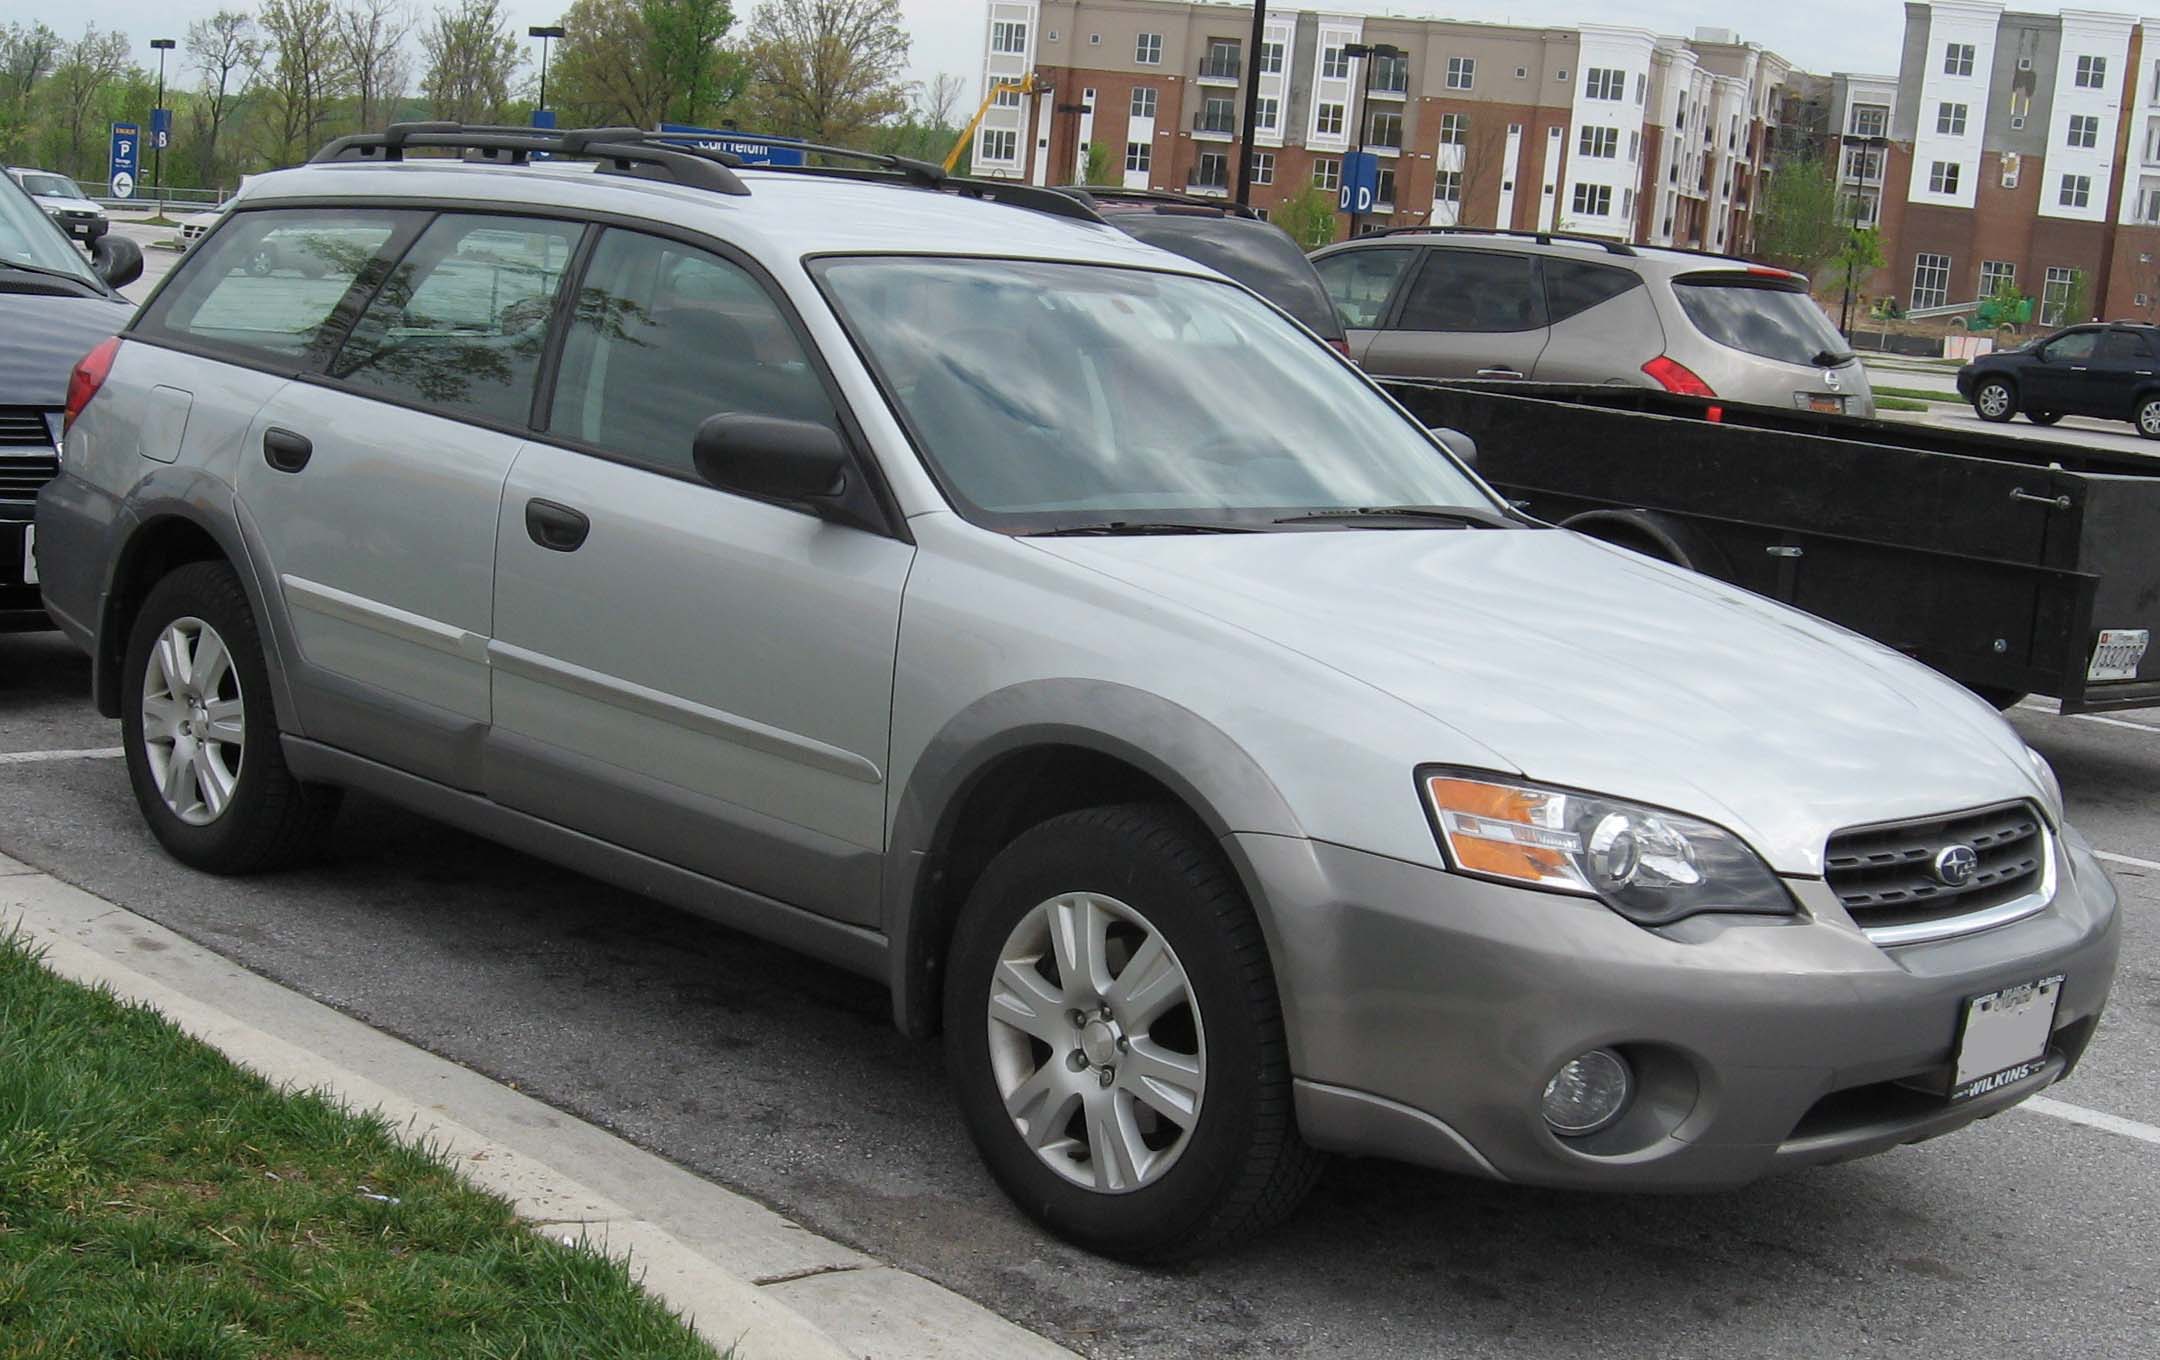 2005 Subaru Outback Sport VIN Number Search - AutoDetective